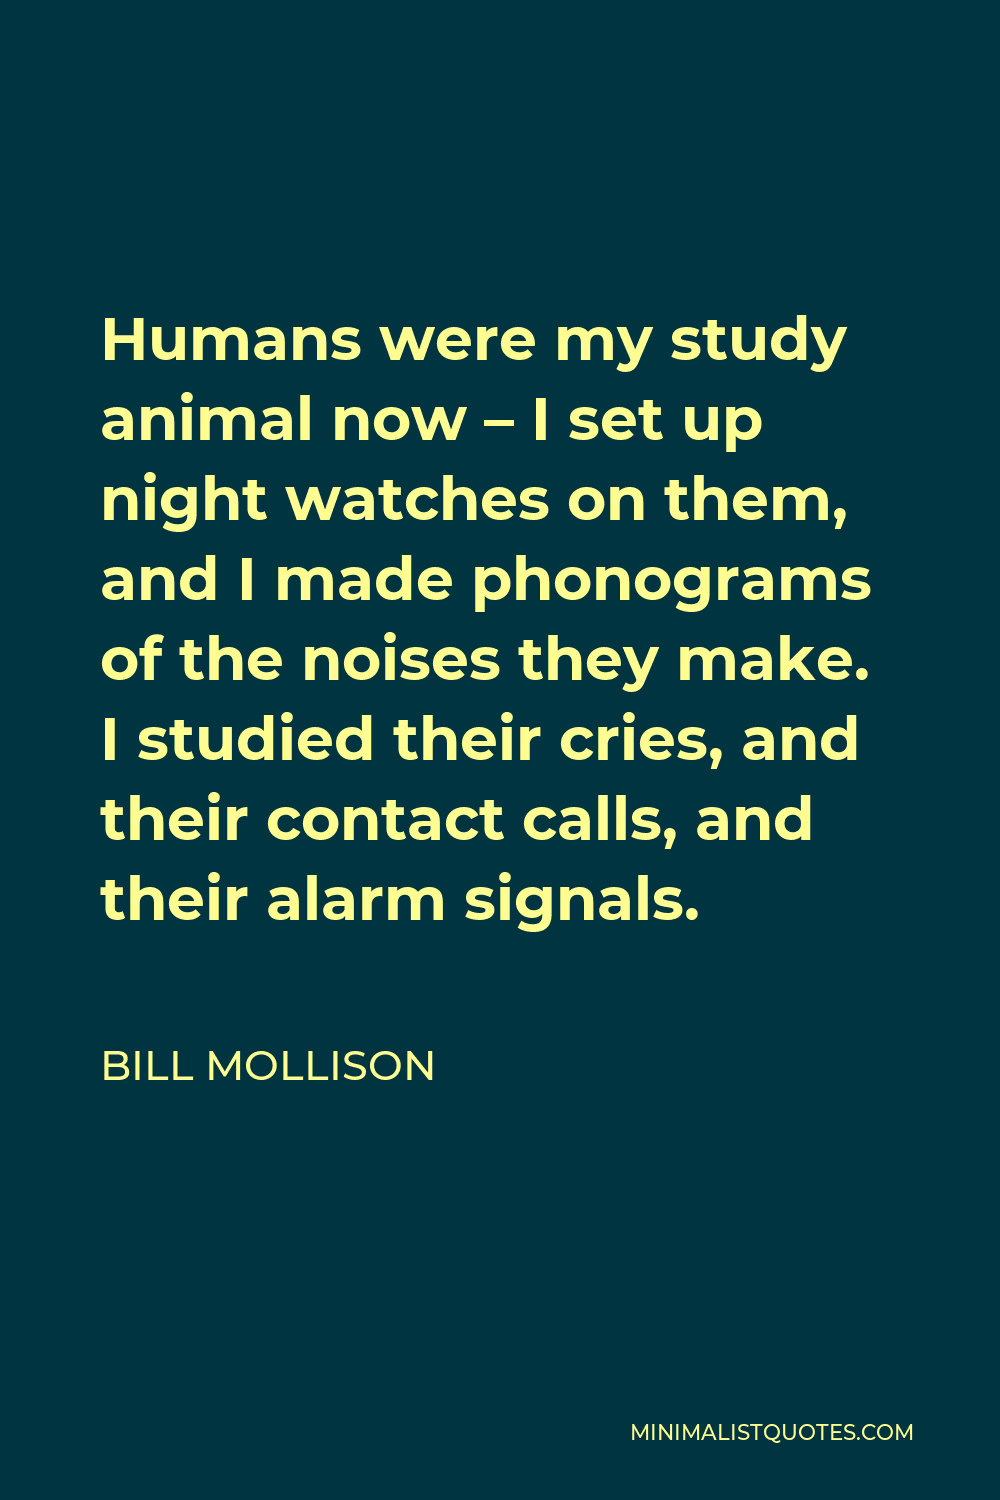 Bill Mollison Quote - Humans were my study animal now – I set up night watches on them, and I made phonograms of the noises they make. I studied their cries, and their contact calls, and their alarm signals.